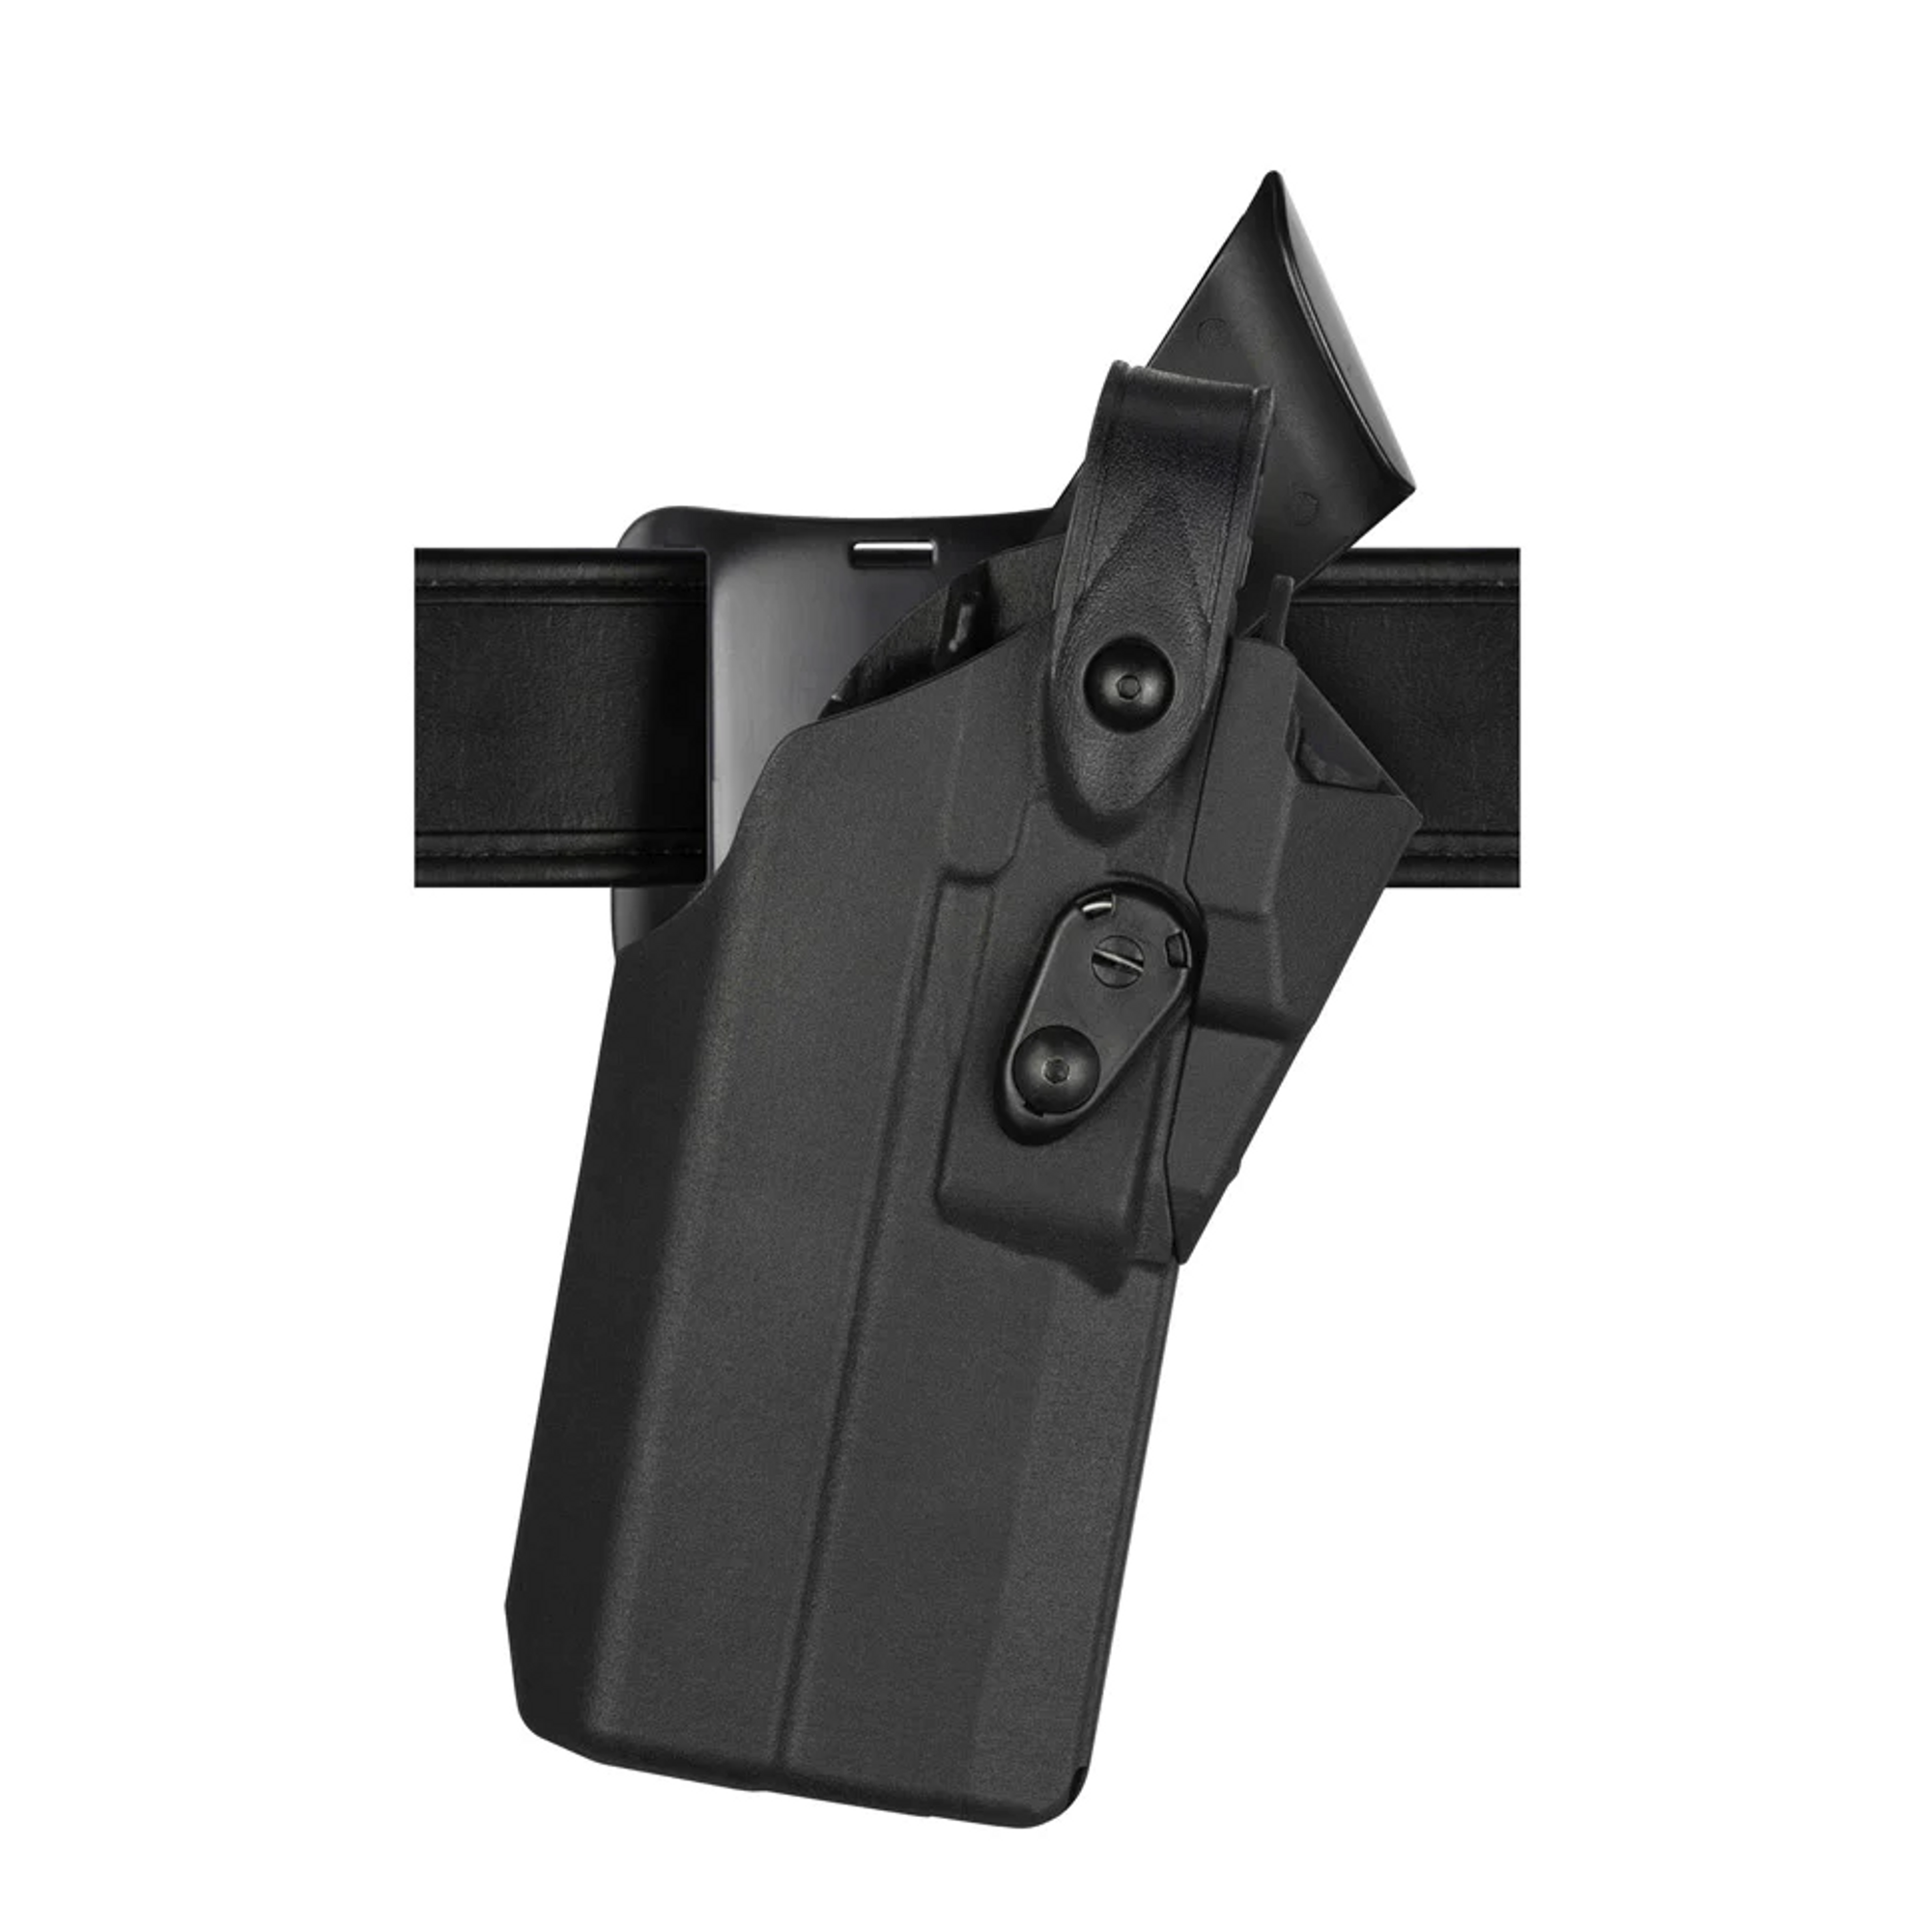 Model 7360rds 7ts Als/sls Mid-ride Duty Holster For Glock 19 W/ Compact Light - KR7360RDS-28327-481